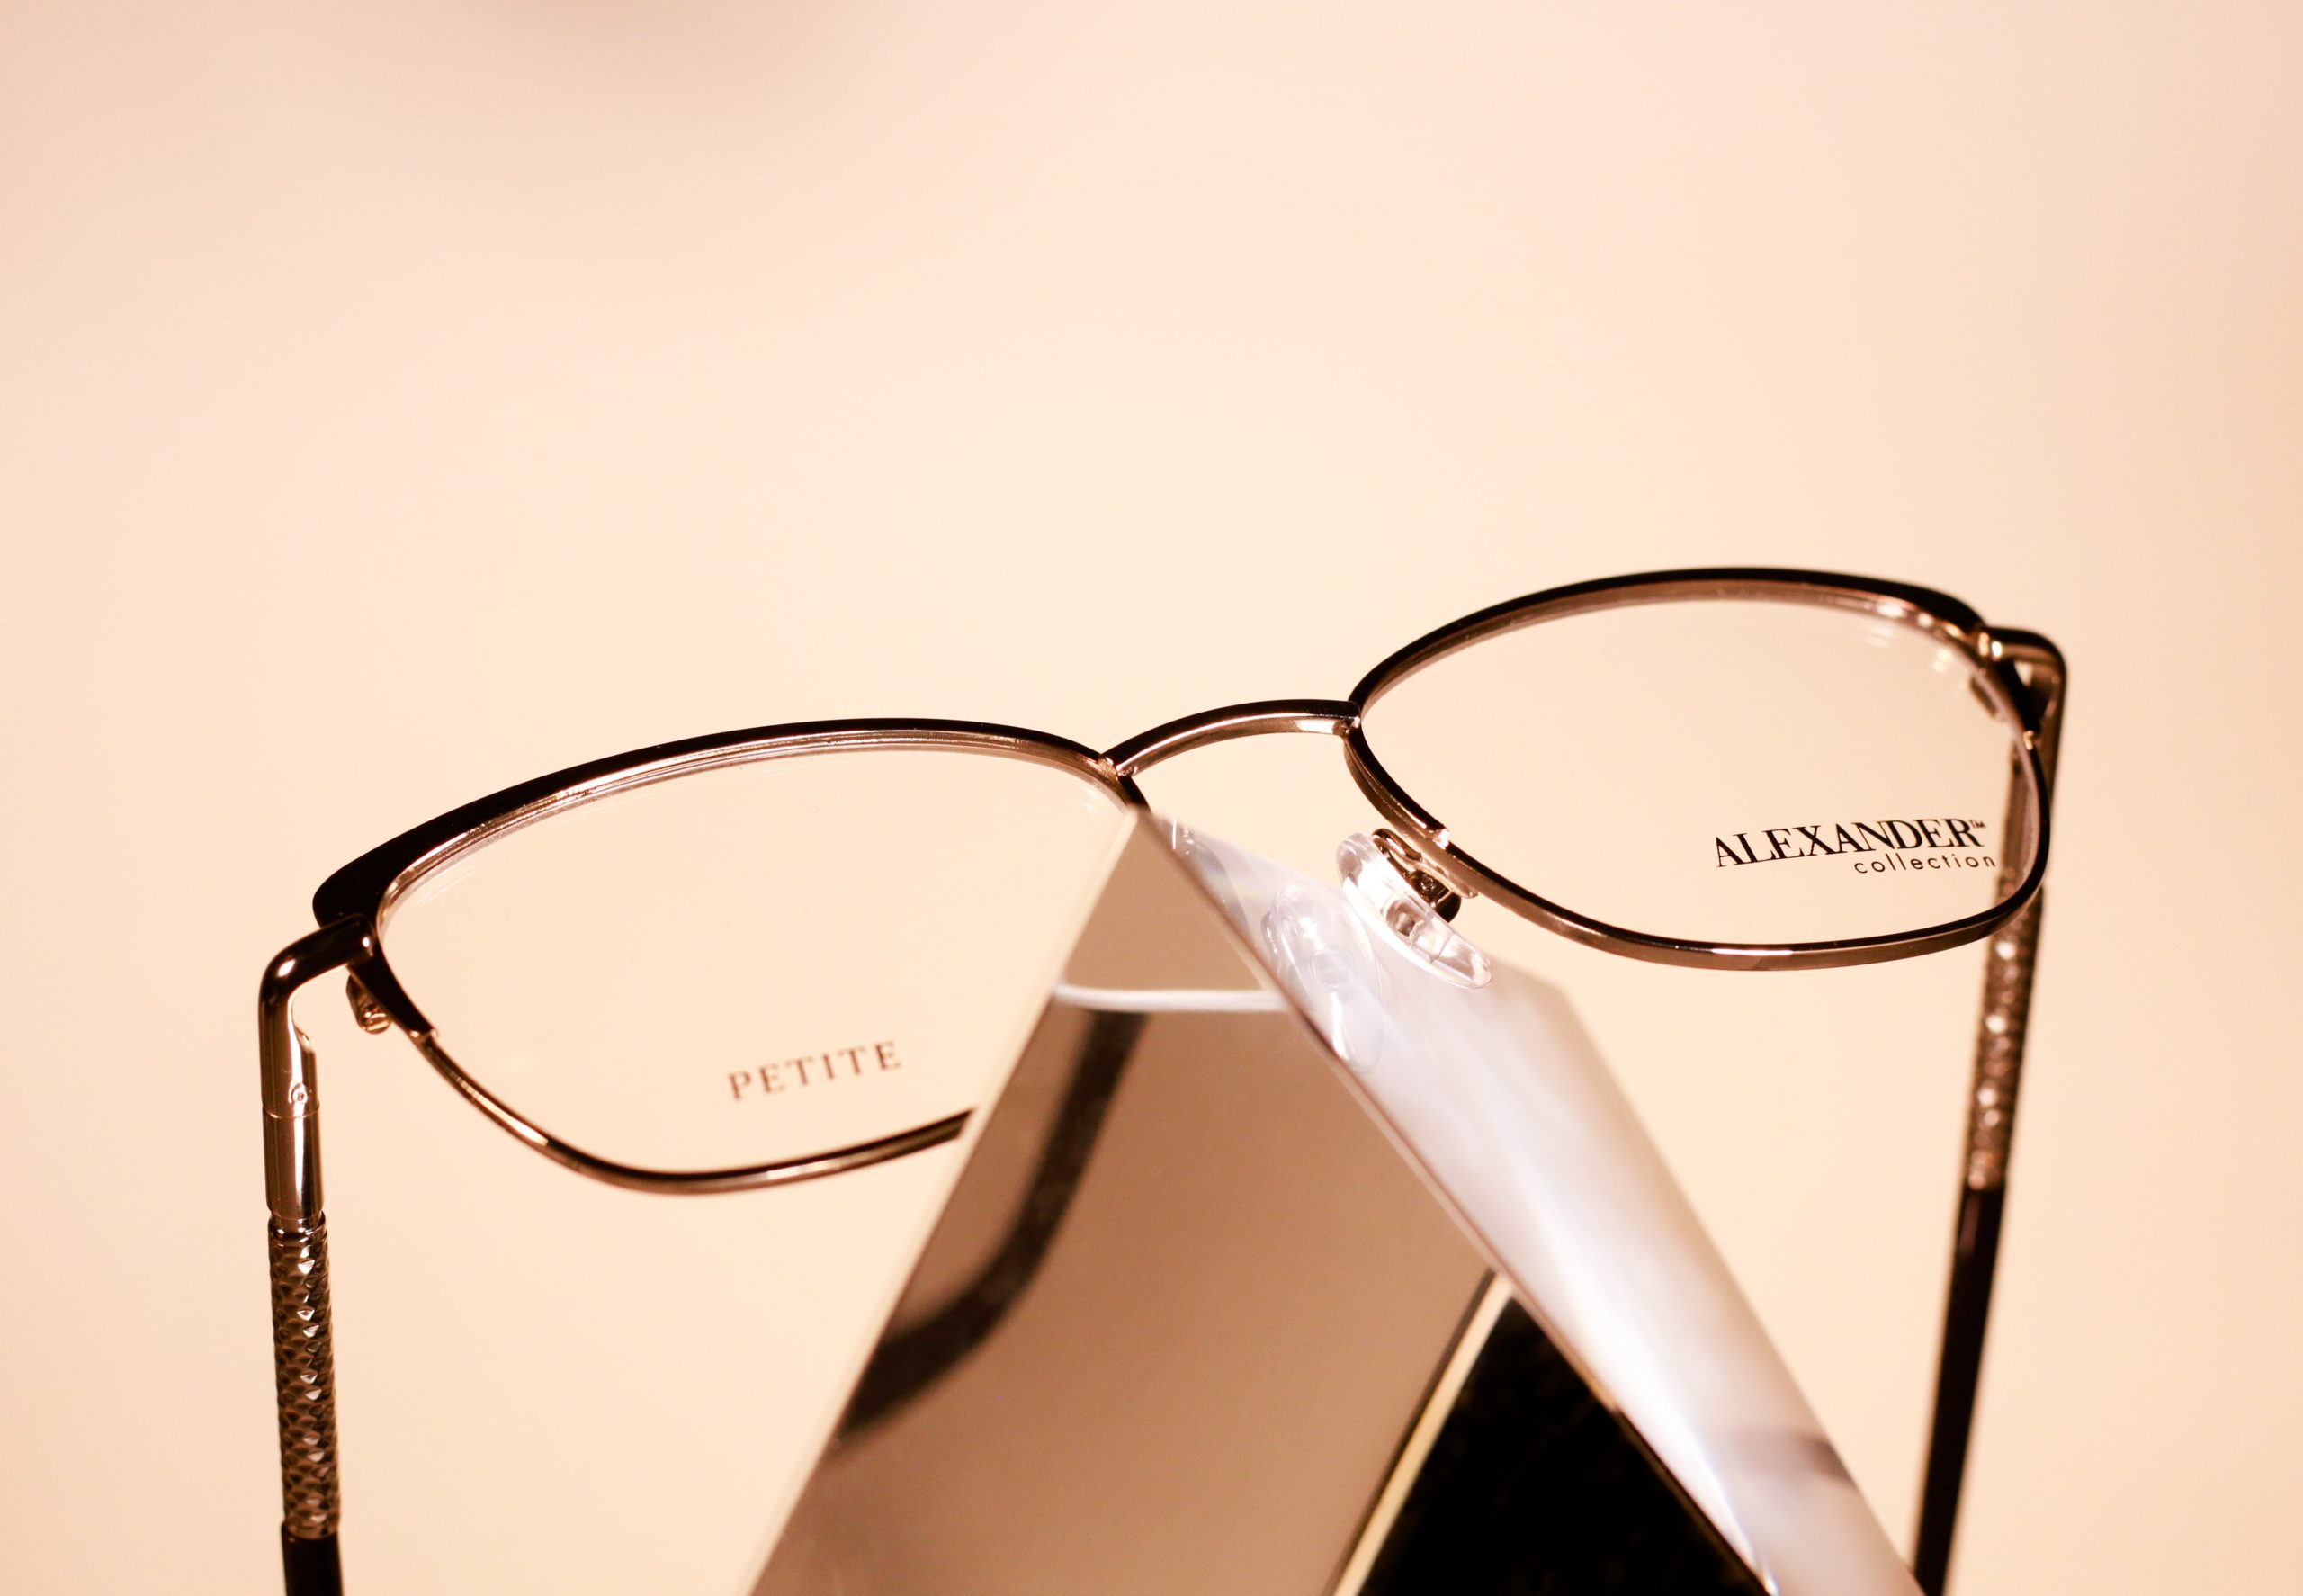 Alexander Collection Petite frames displayed on a prism